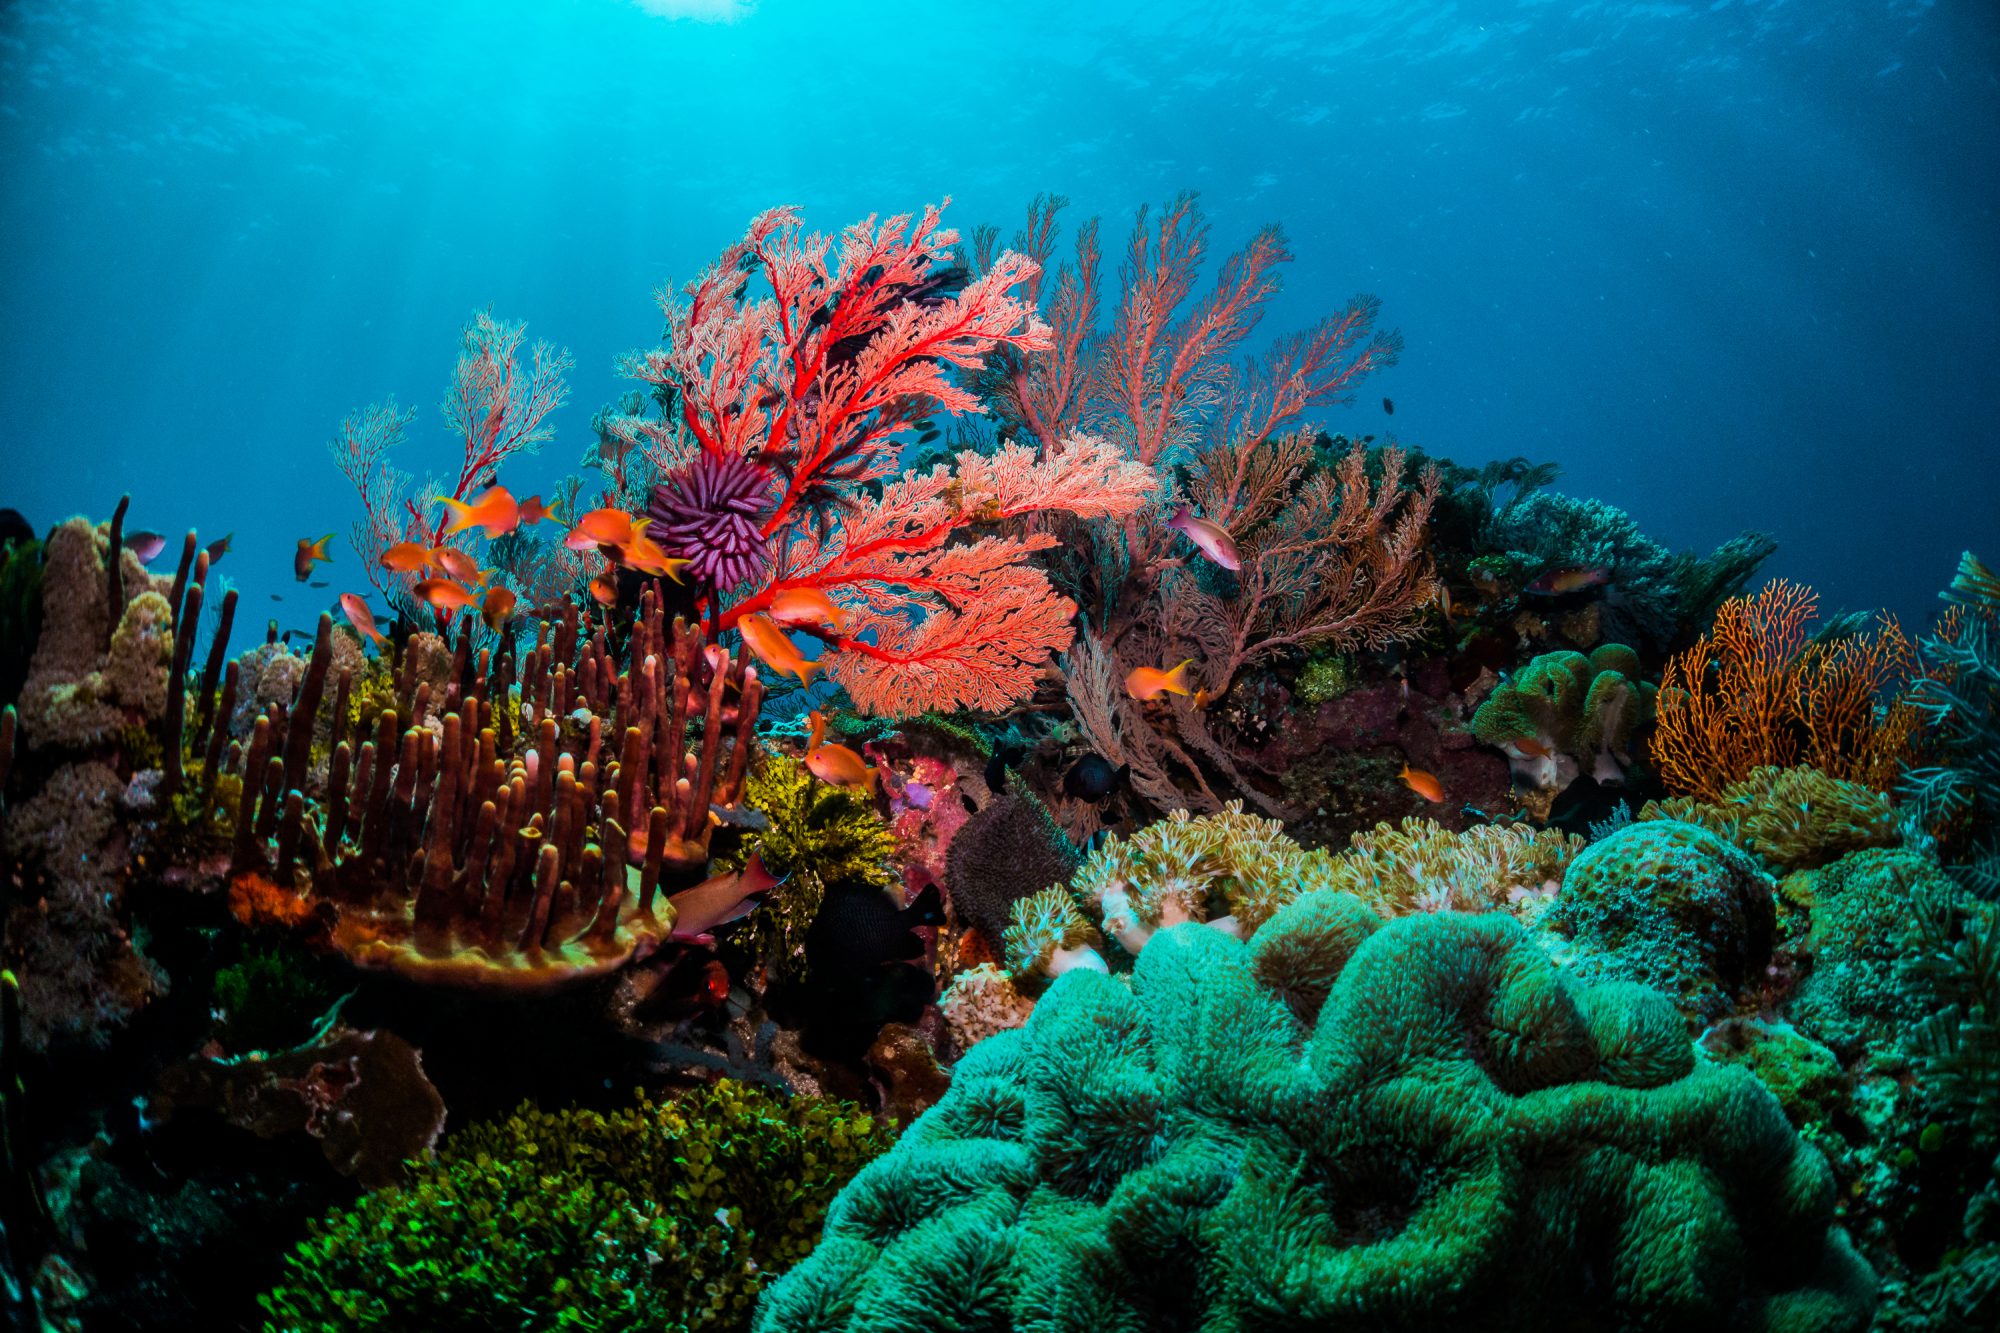 CASE STUDY: Pacific coral reef management in a changing climate